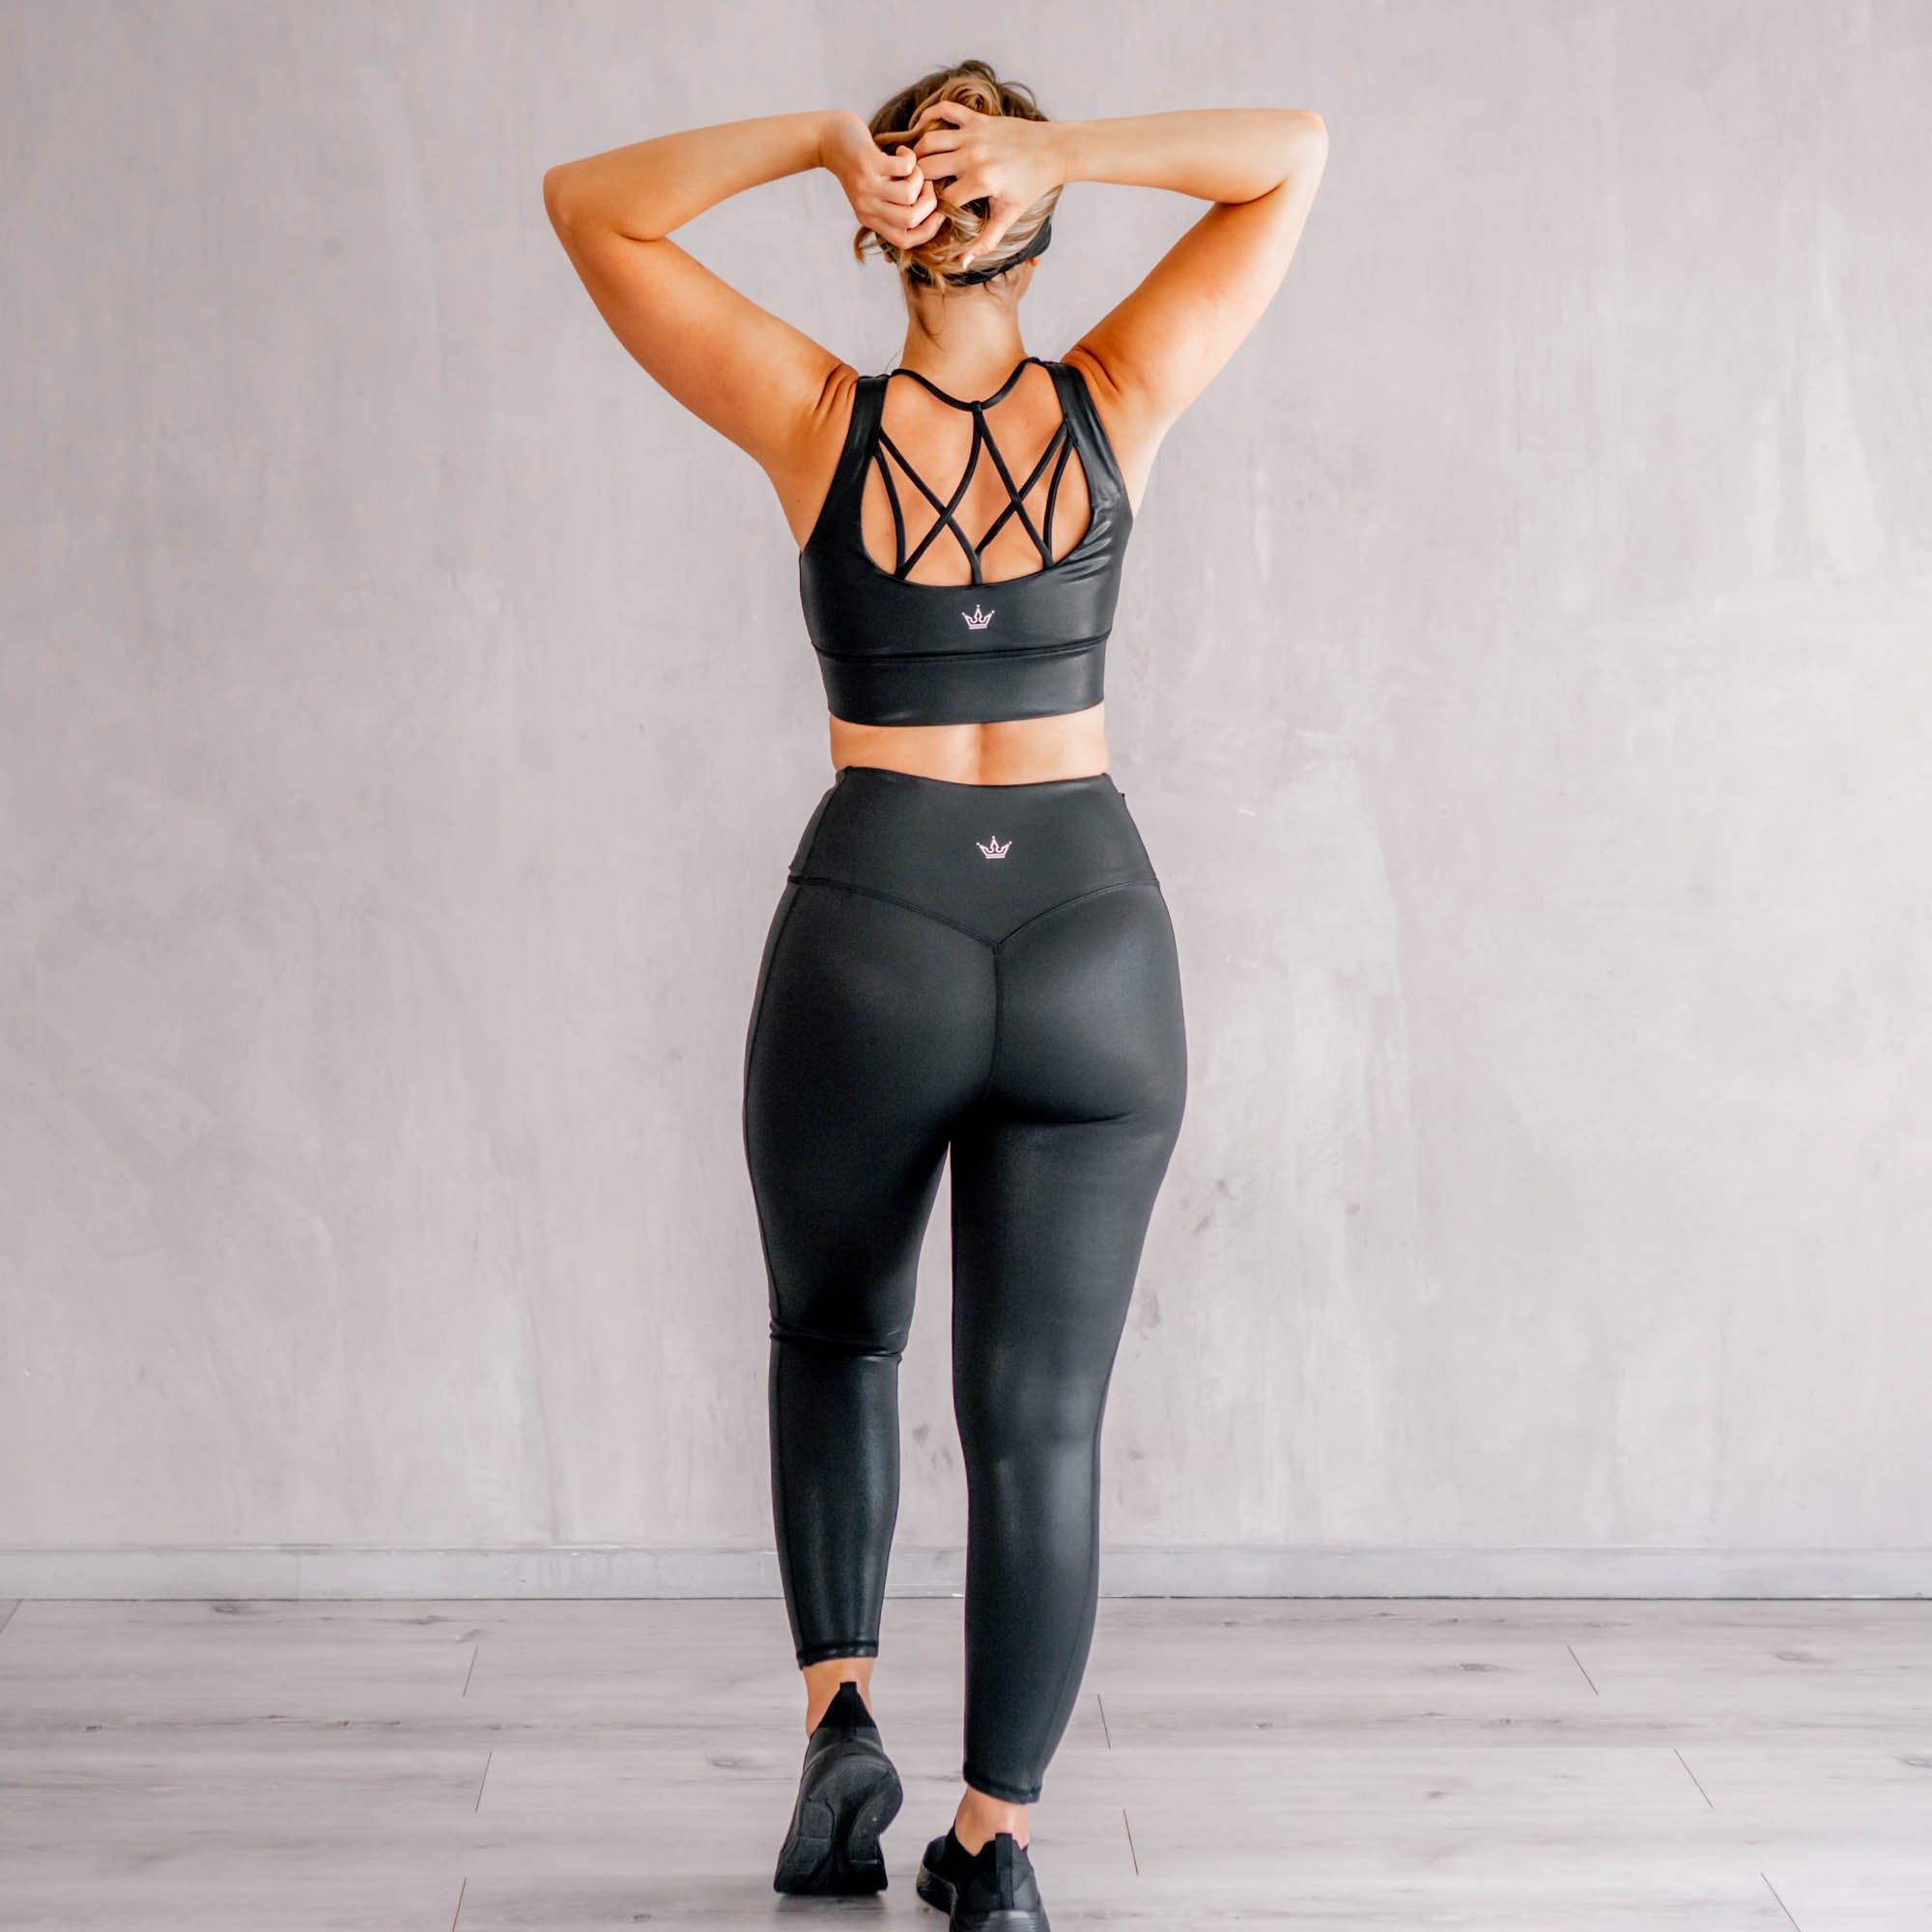 Discover 140+ glitter workout leggings latest